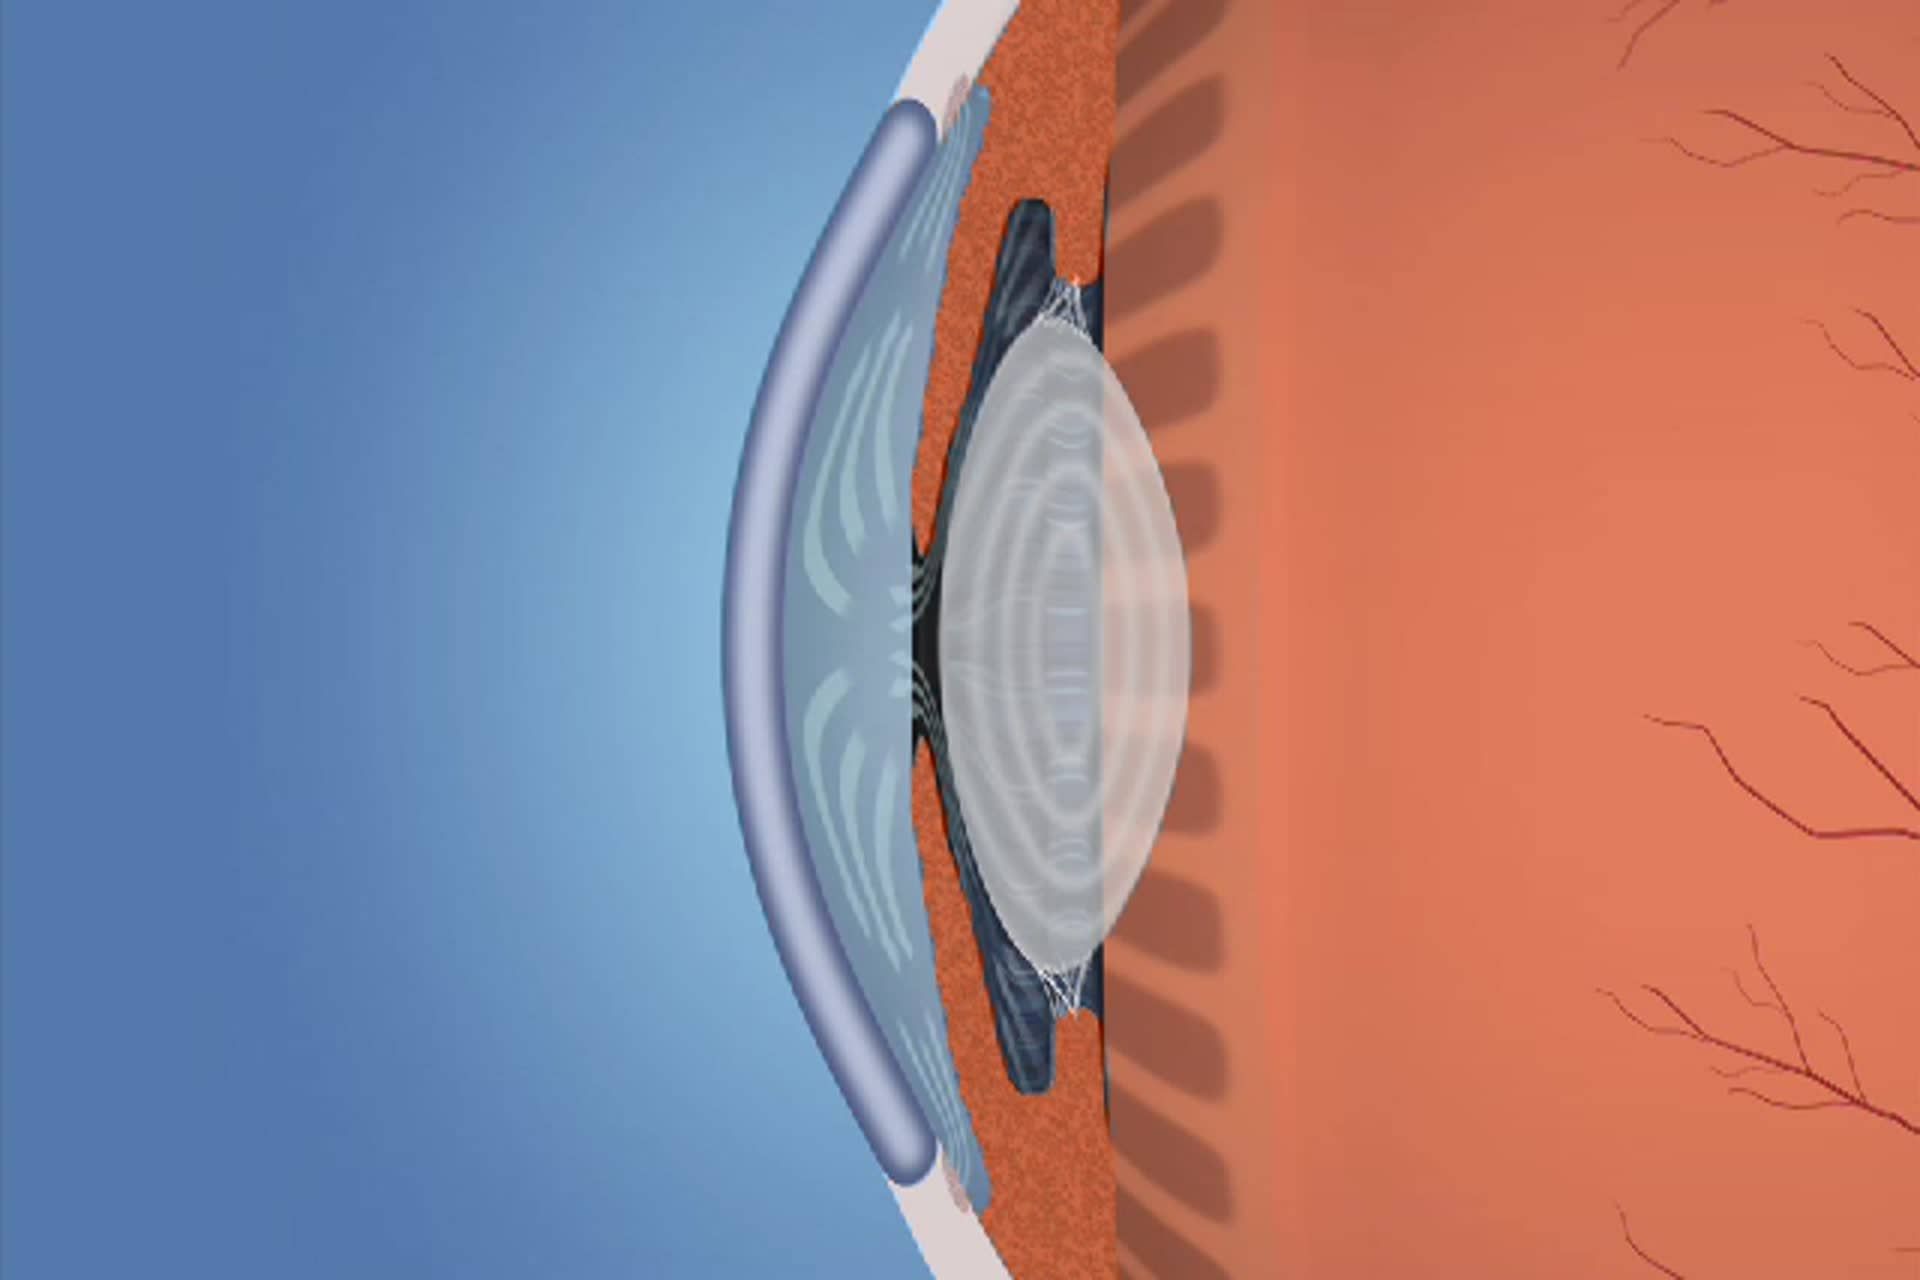 Glaucoma - What is open-angle glaucoma?